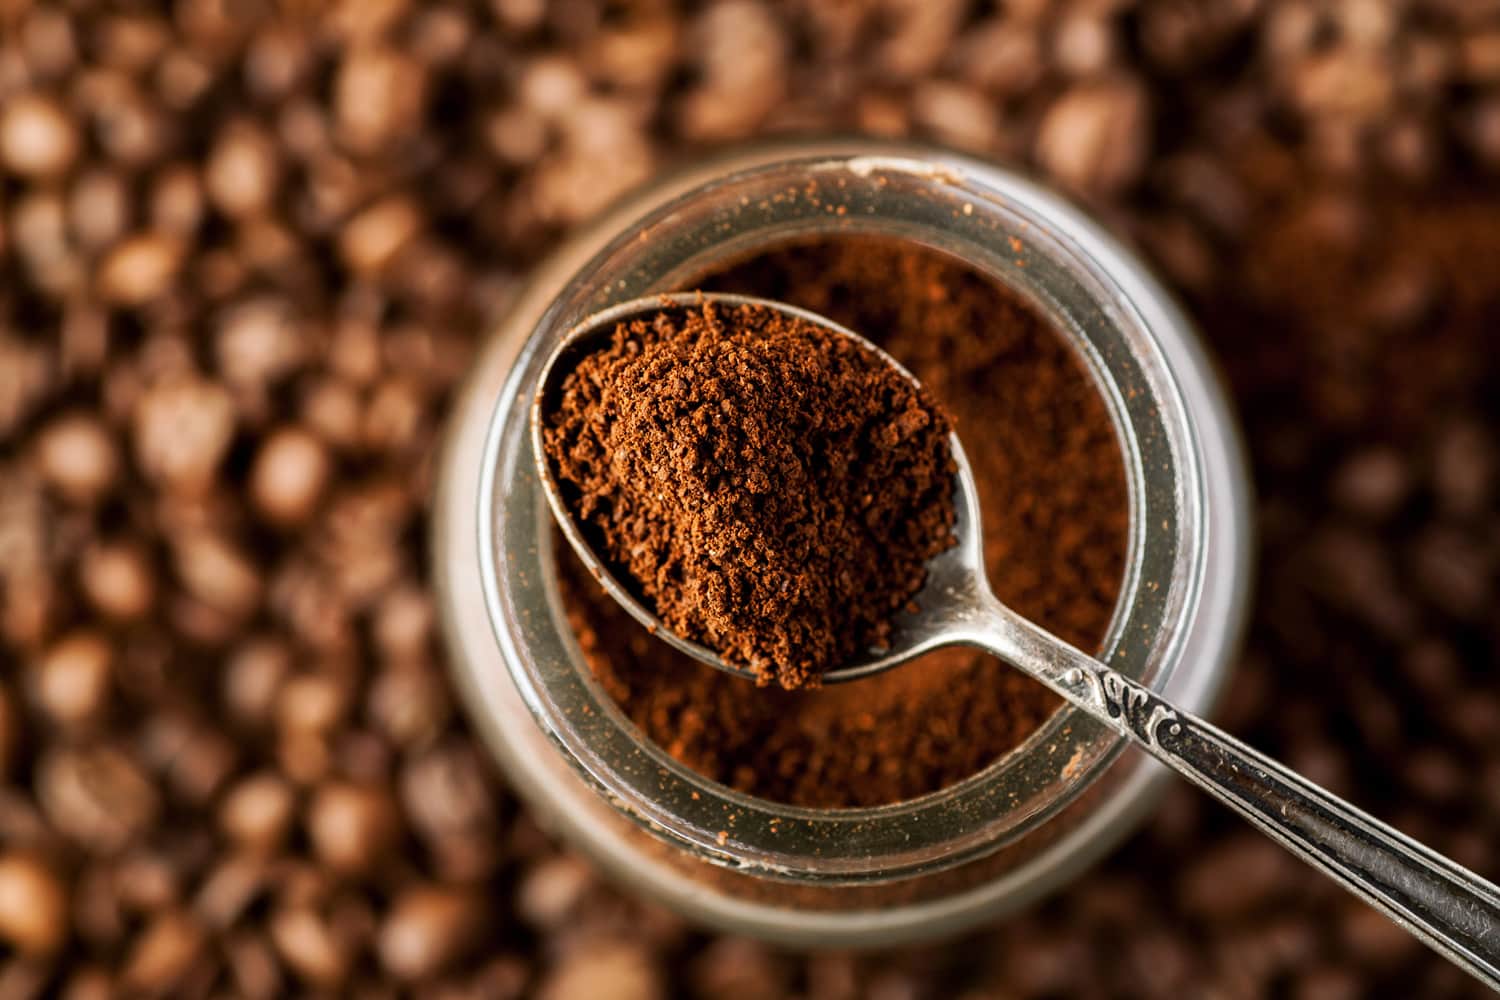 Ground coffee in a metal spoon on a top of glass jar, shallow depth of field.